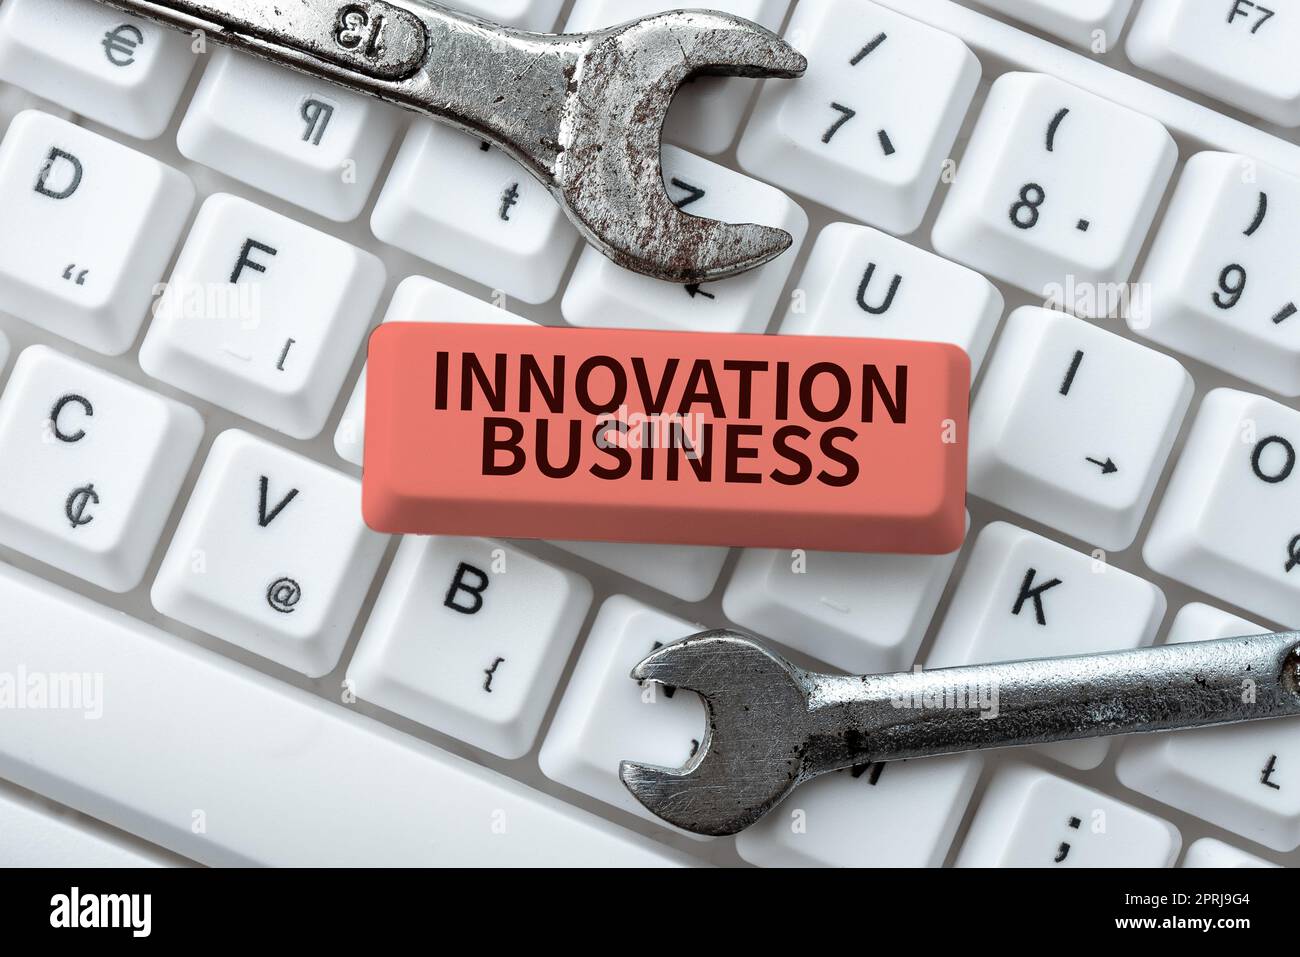 Writing displaying text Innovation Business. Business overview Introduce New Ideas Workflows Methodology Services Stock Photo